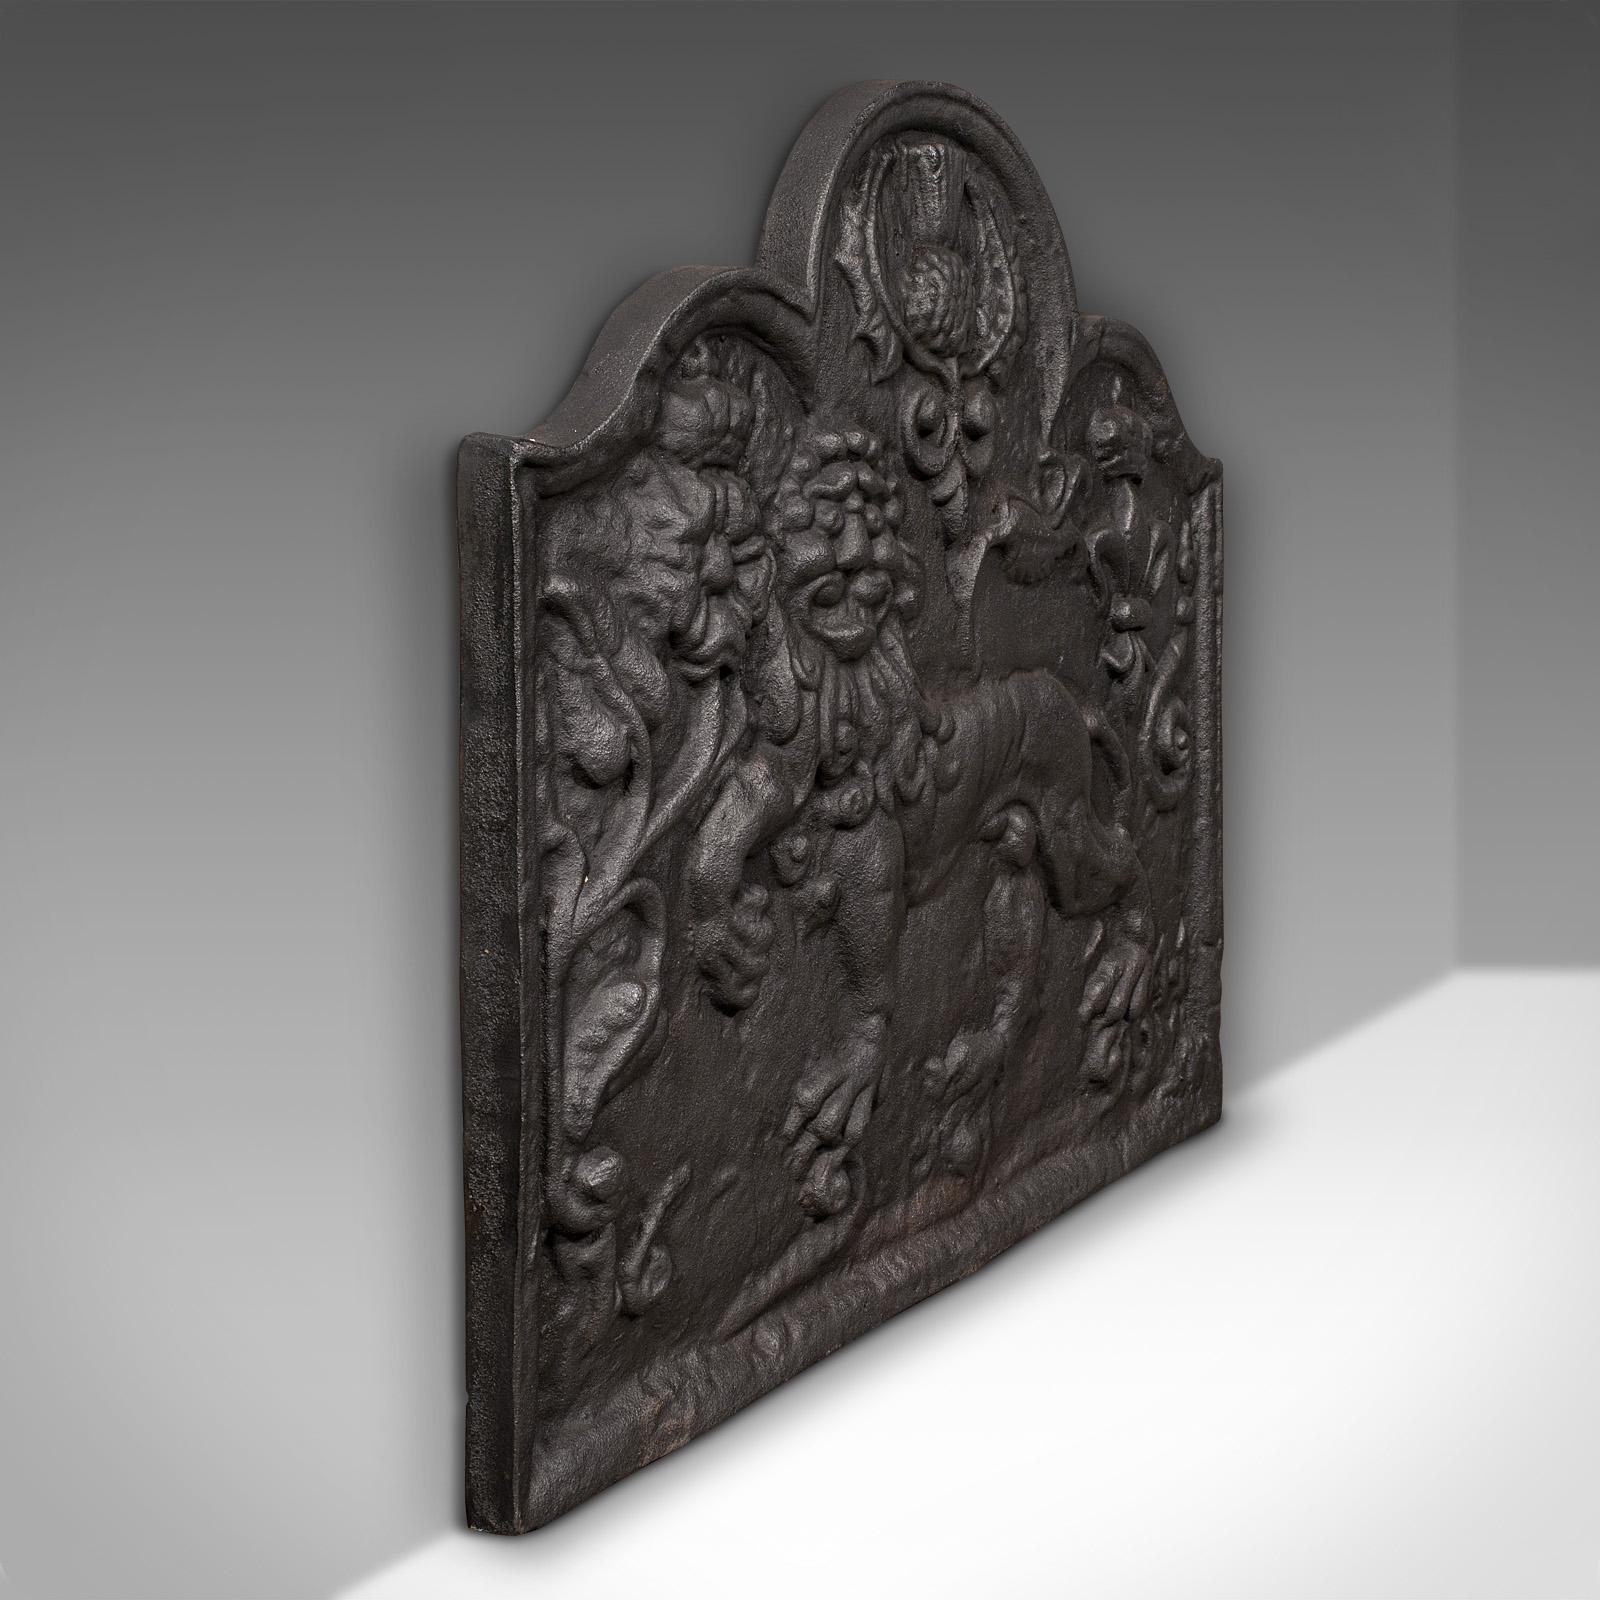 British Antique Relief Fire Back, English, Iron, Fireplace, Carolean Revival, Victorian